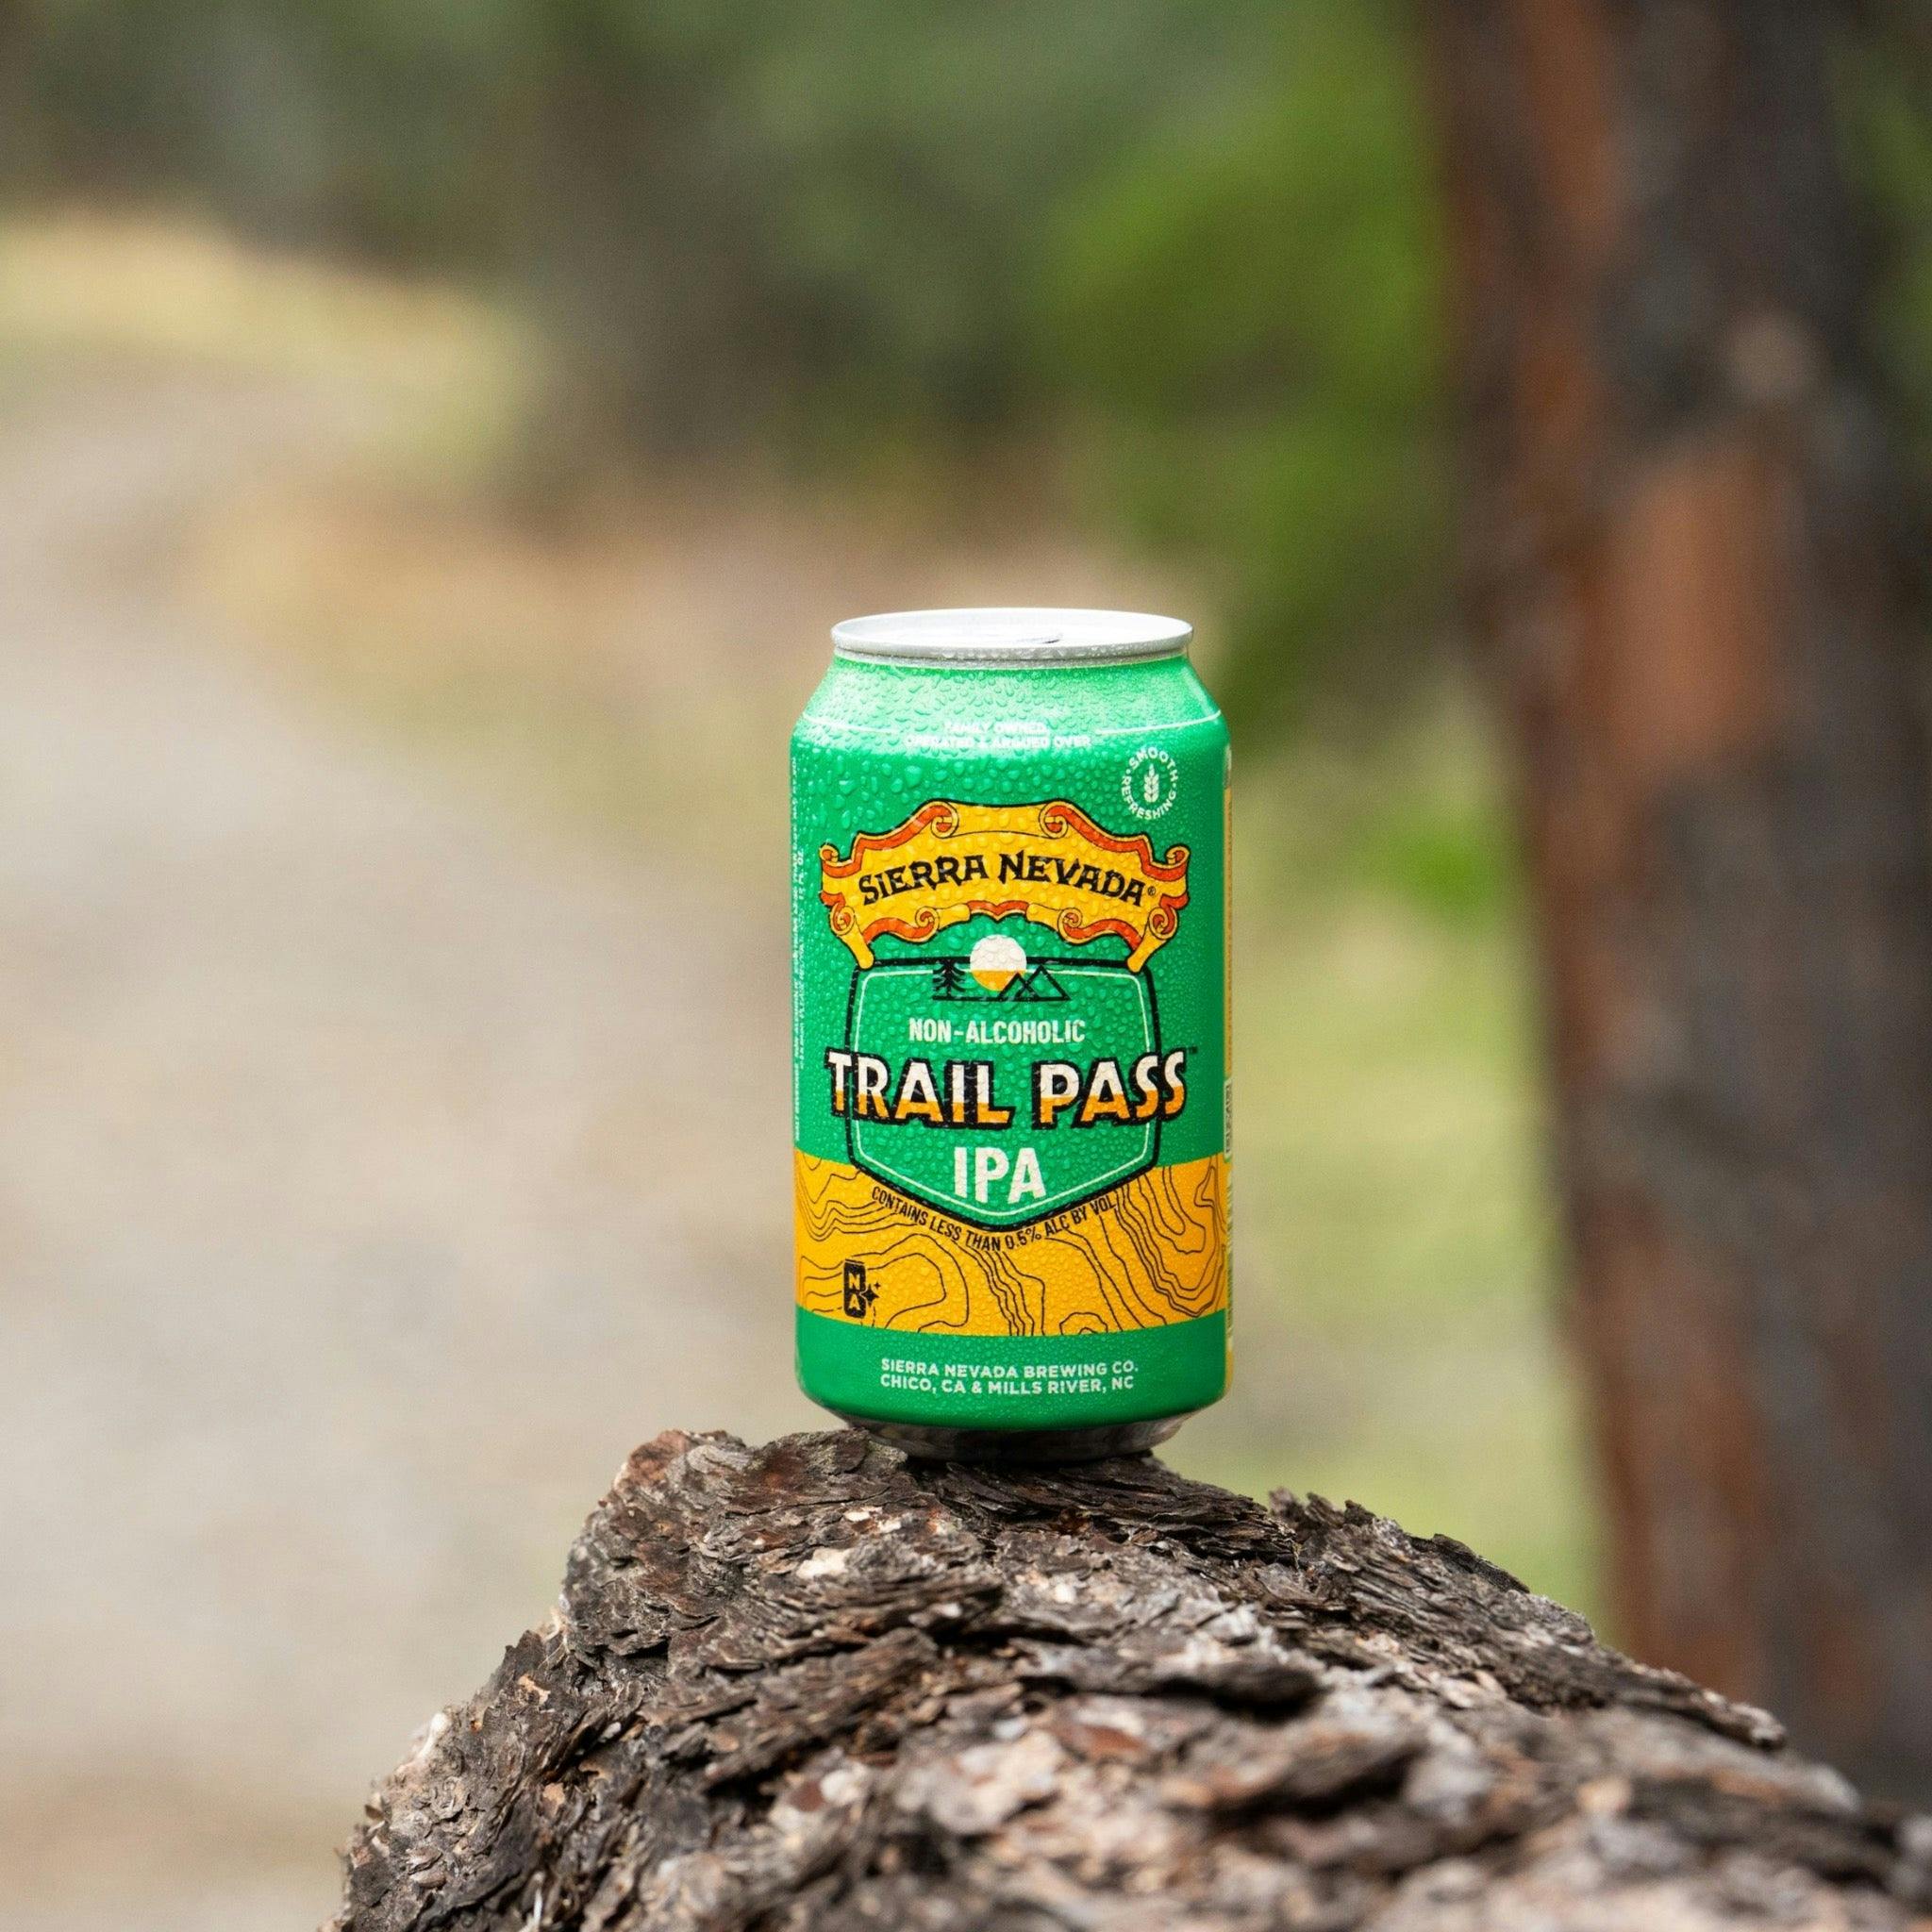 Sierra Nevada Brewing Co. Trail Pass IPA Non-Alcoholic Brew - A refreshing can of Trail Pass IPA rests on the end of a fallen log near a hiking trail.